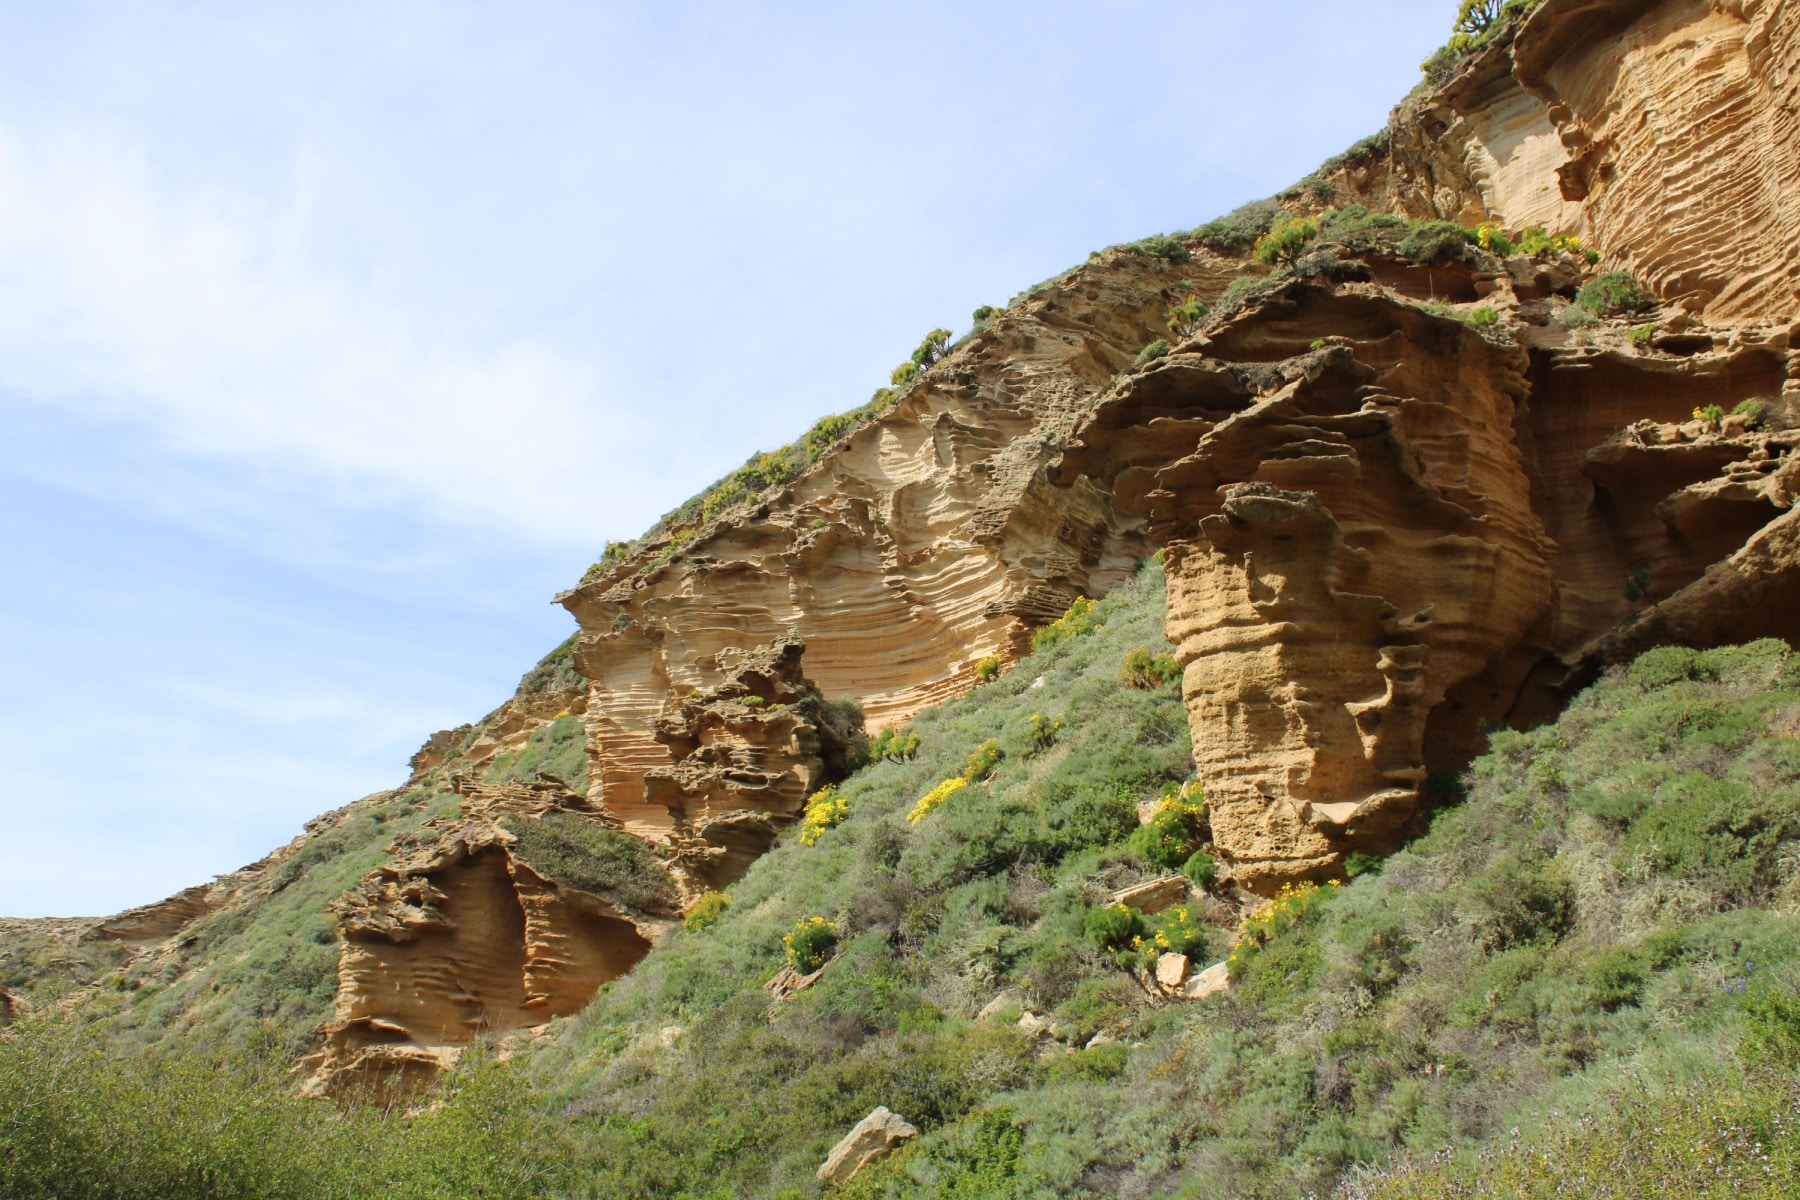 Unique rock formations mixed with greenery on the Lobo Canyon trail in Channel Islands National Park.